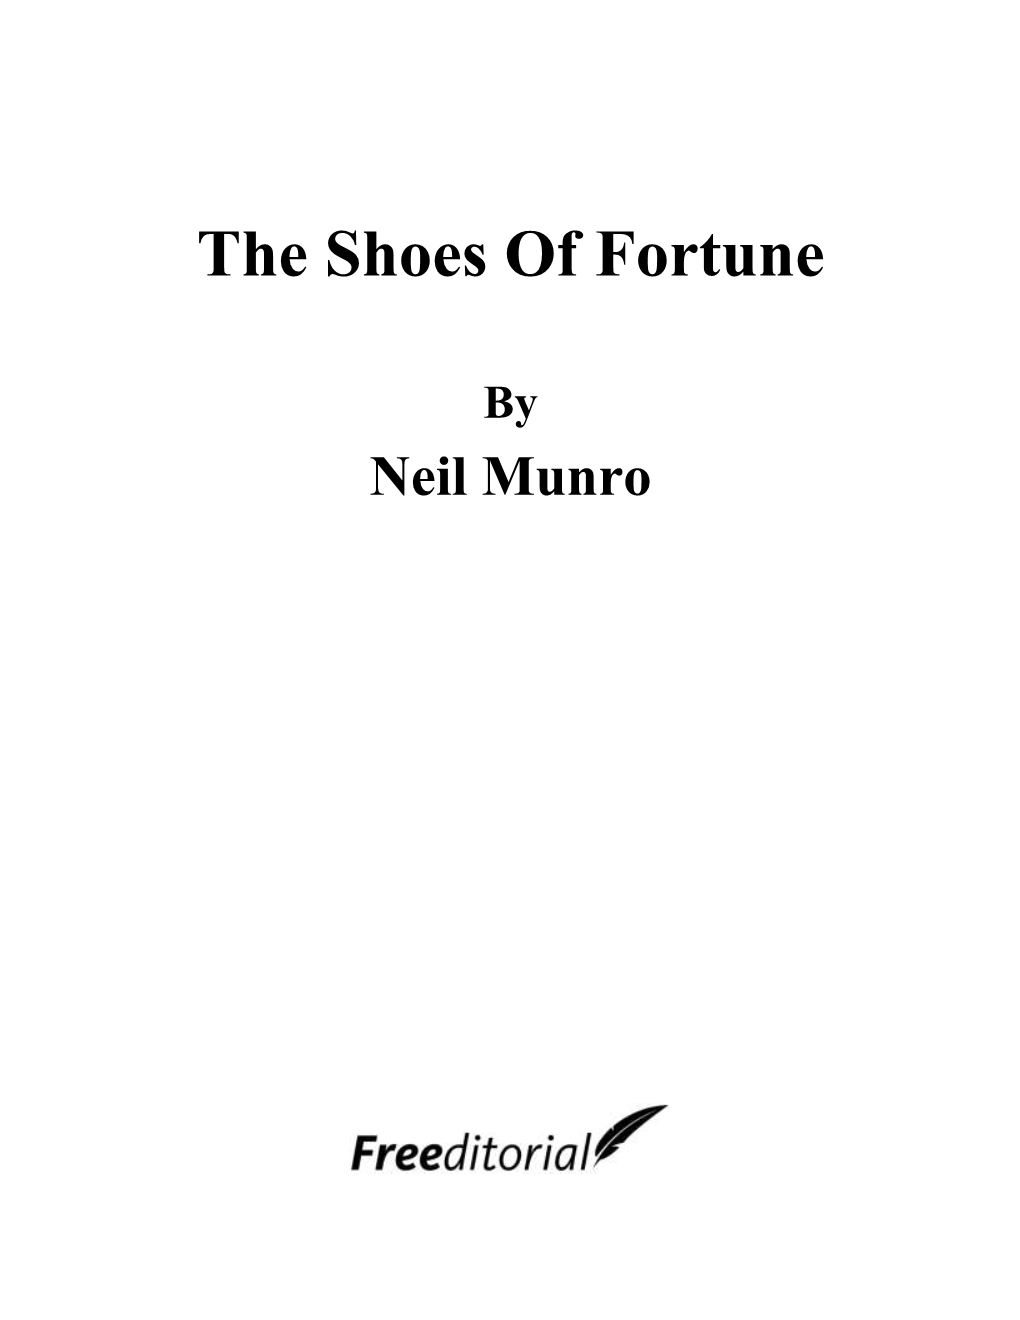 The Shoes of Fortune